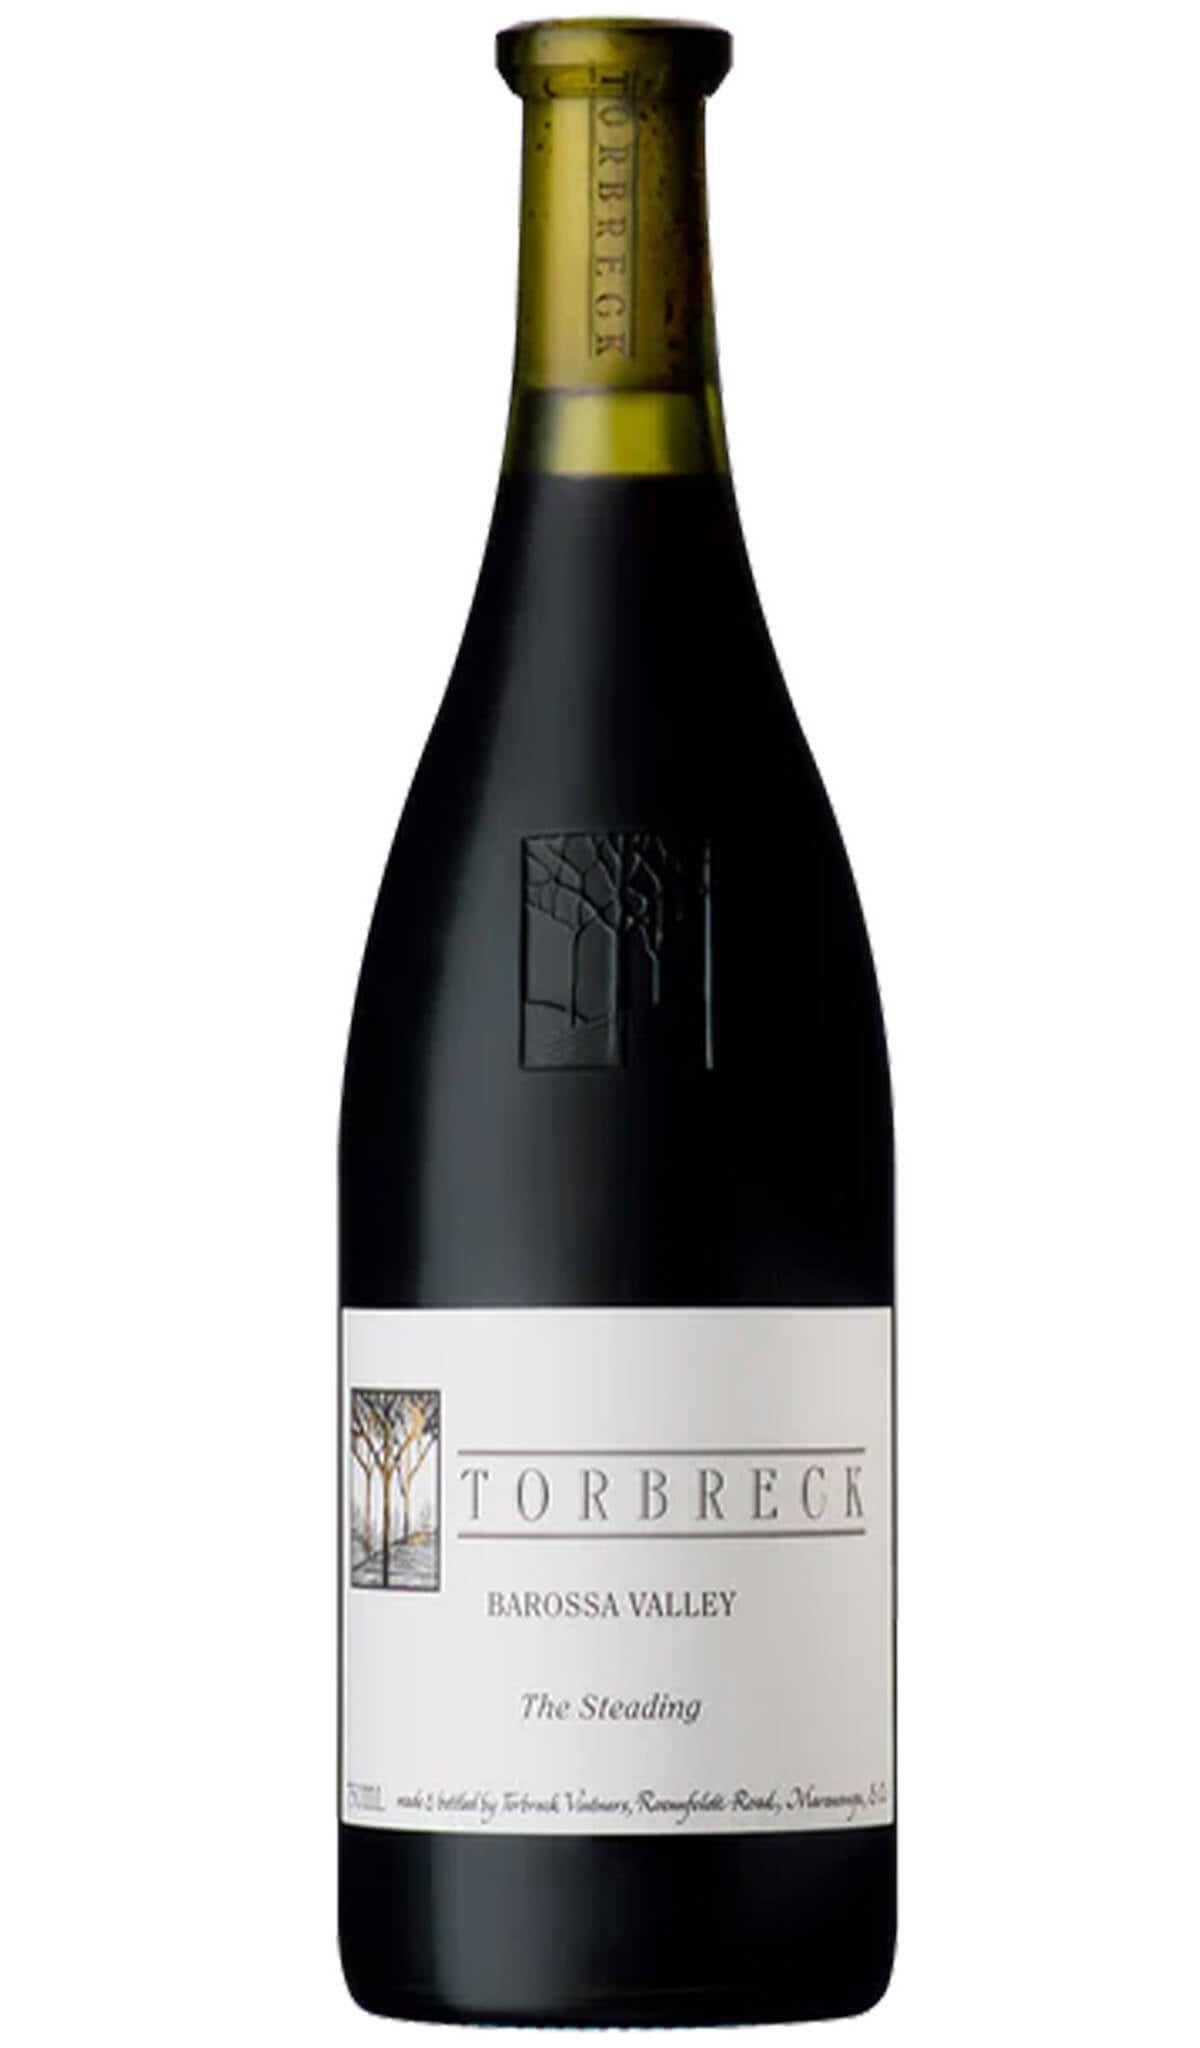 Find out more or buy Torbreck Barossa Valley The Steading GSM 2021 online at Wine Sellers Direct - Australia’s independent liquor specialists.